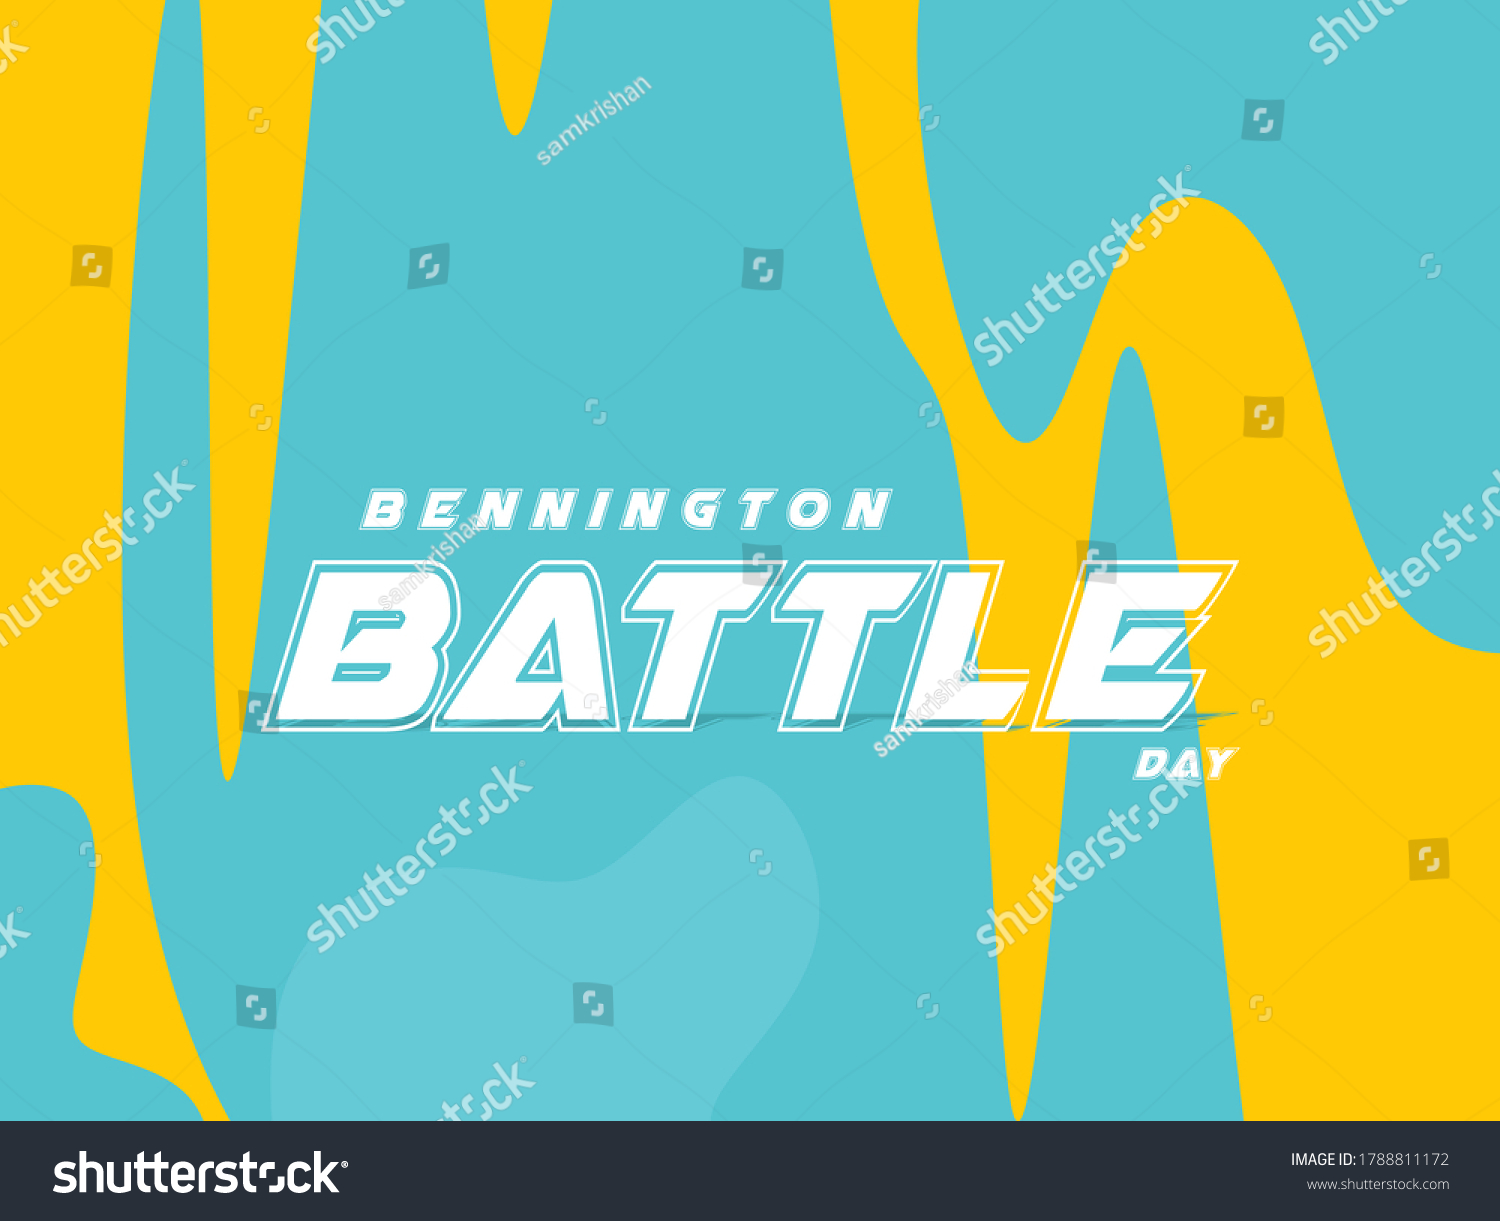 SVG of Bennington Battle Day Creative Design with Red Color and stylish font (Bennington Battle Day is observed on 16 August annually to honour the Battle of Bennington which took place on 16 August, 1777) svg